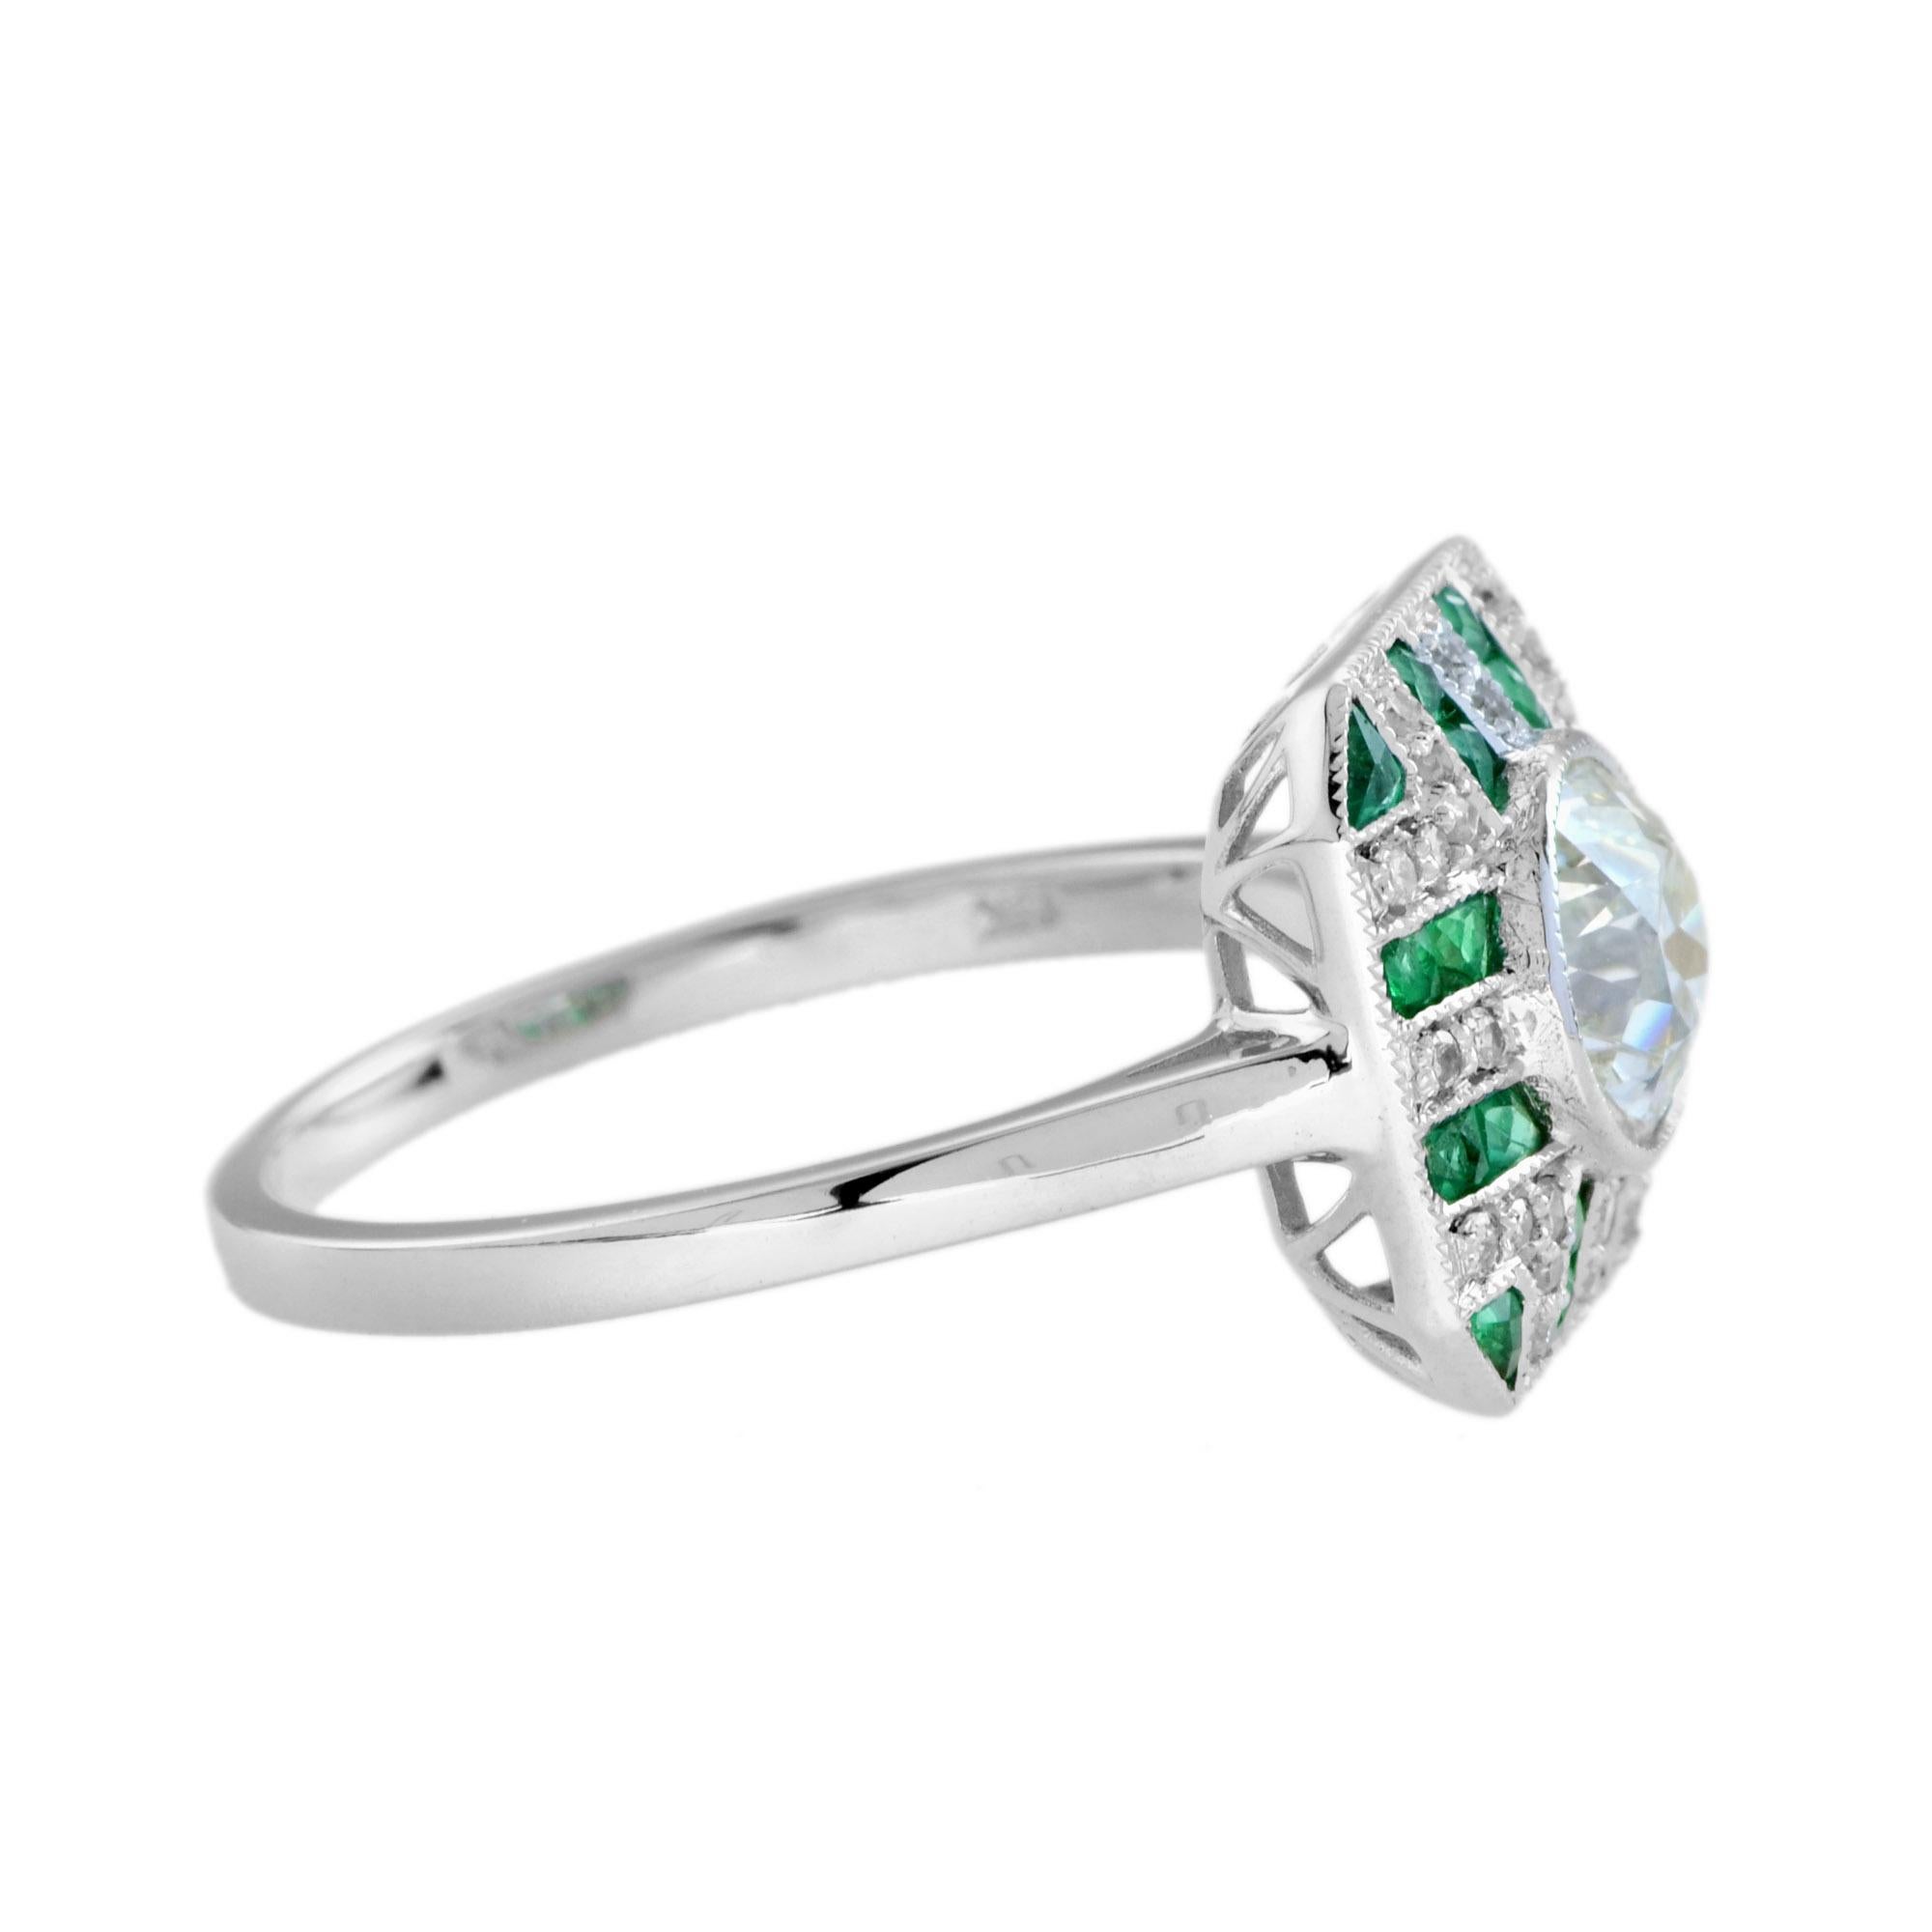 GIA Diamond with Emerald Art Deco Style Engagement Ring in 18k White Gold For Sale 1